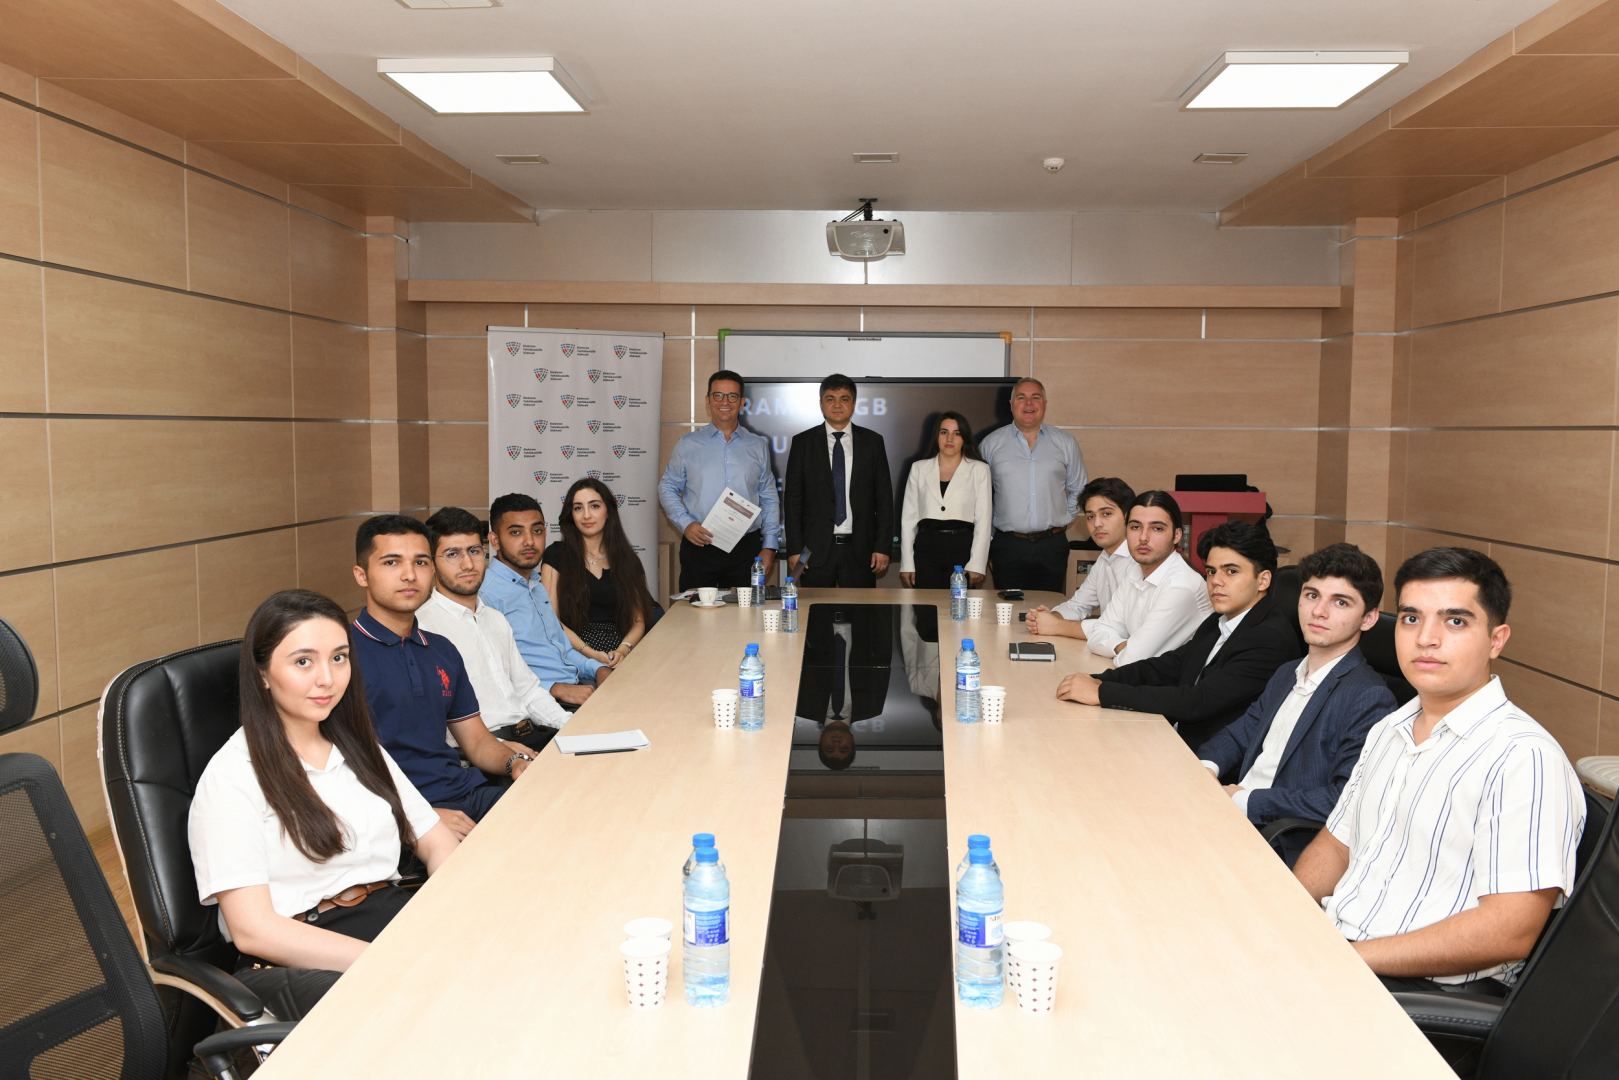 Cybersecurity is one of priority areas in Azerbaijan - ministry [PHOTO]